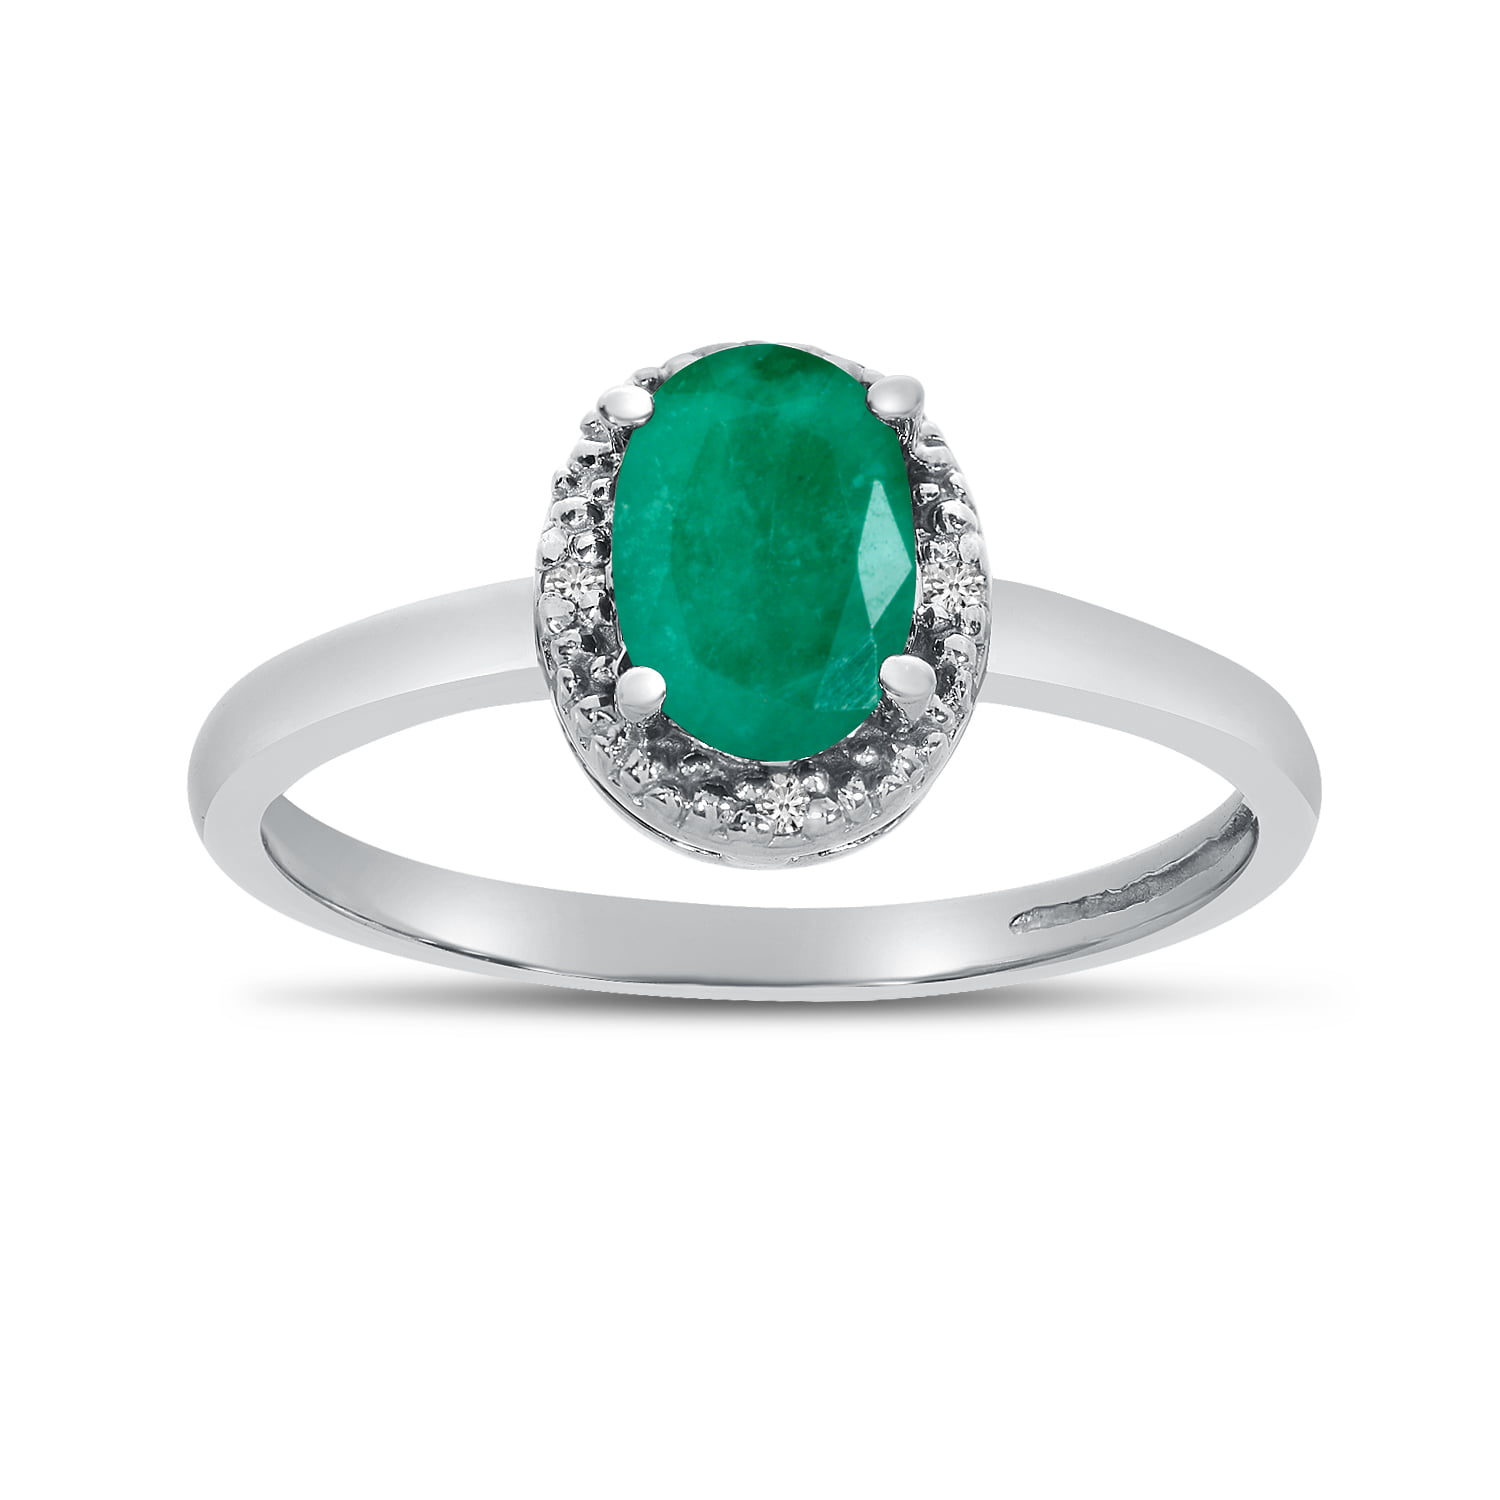 Details about   14k White Gold Oval Emerald And Diamond Ring